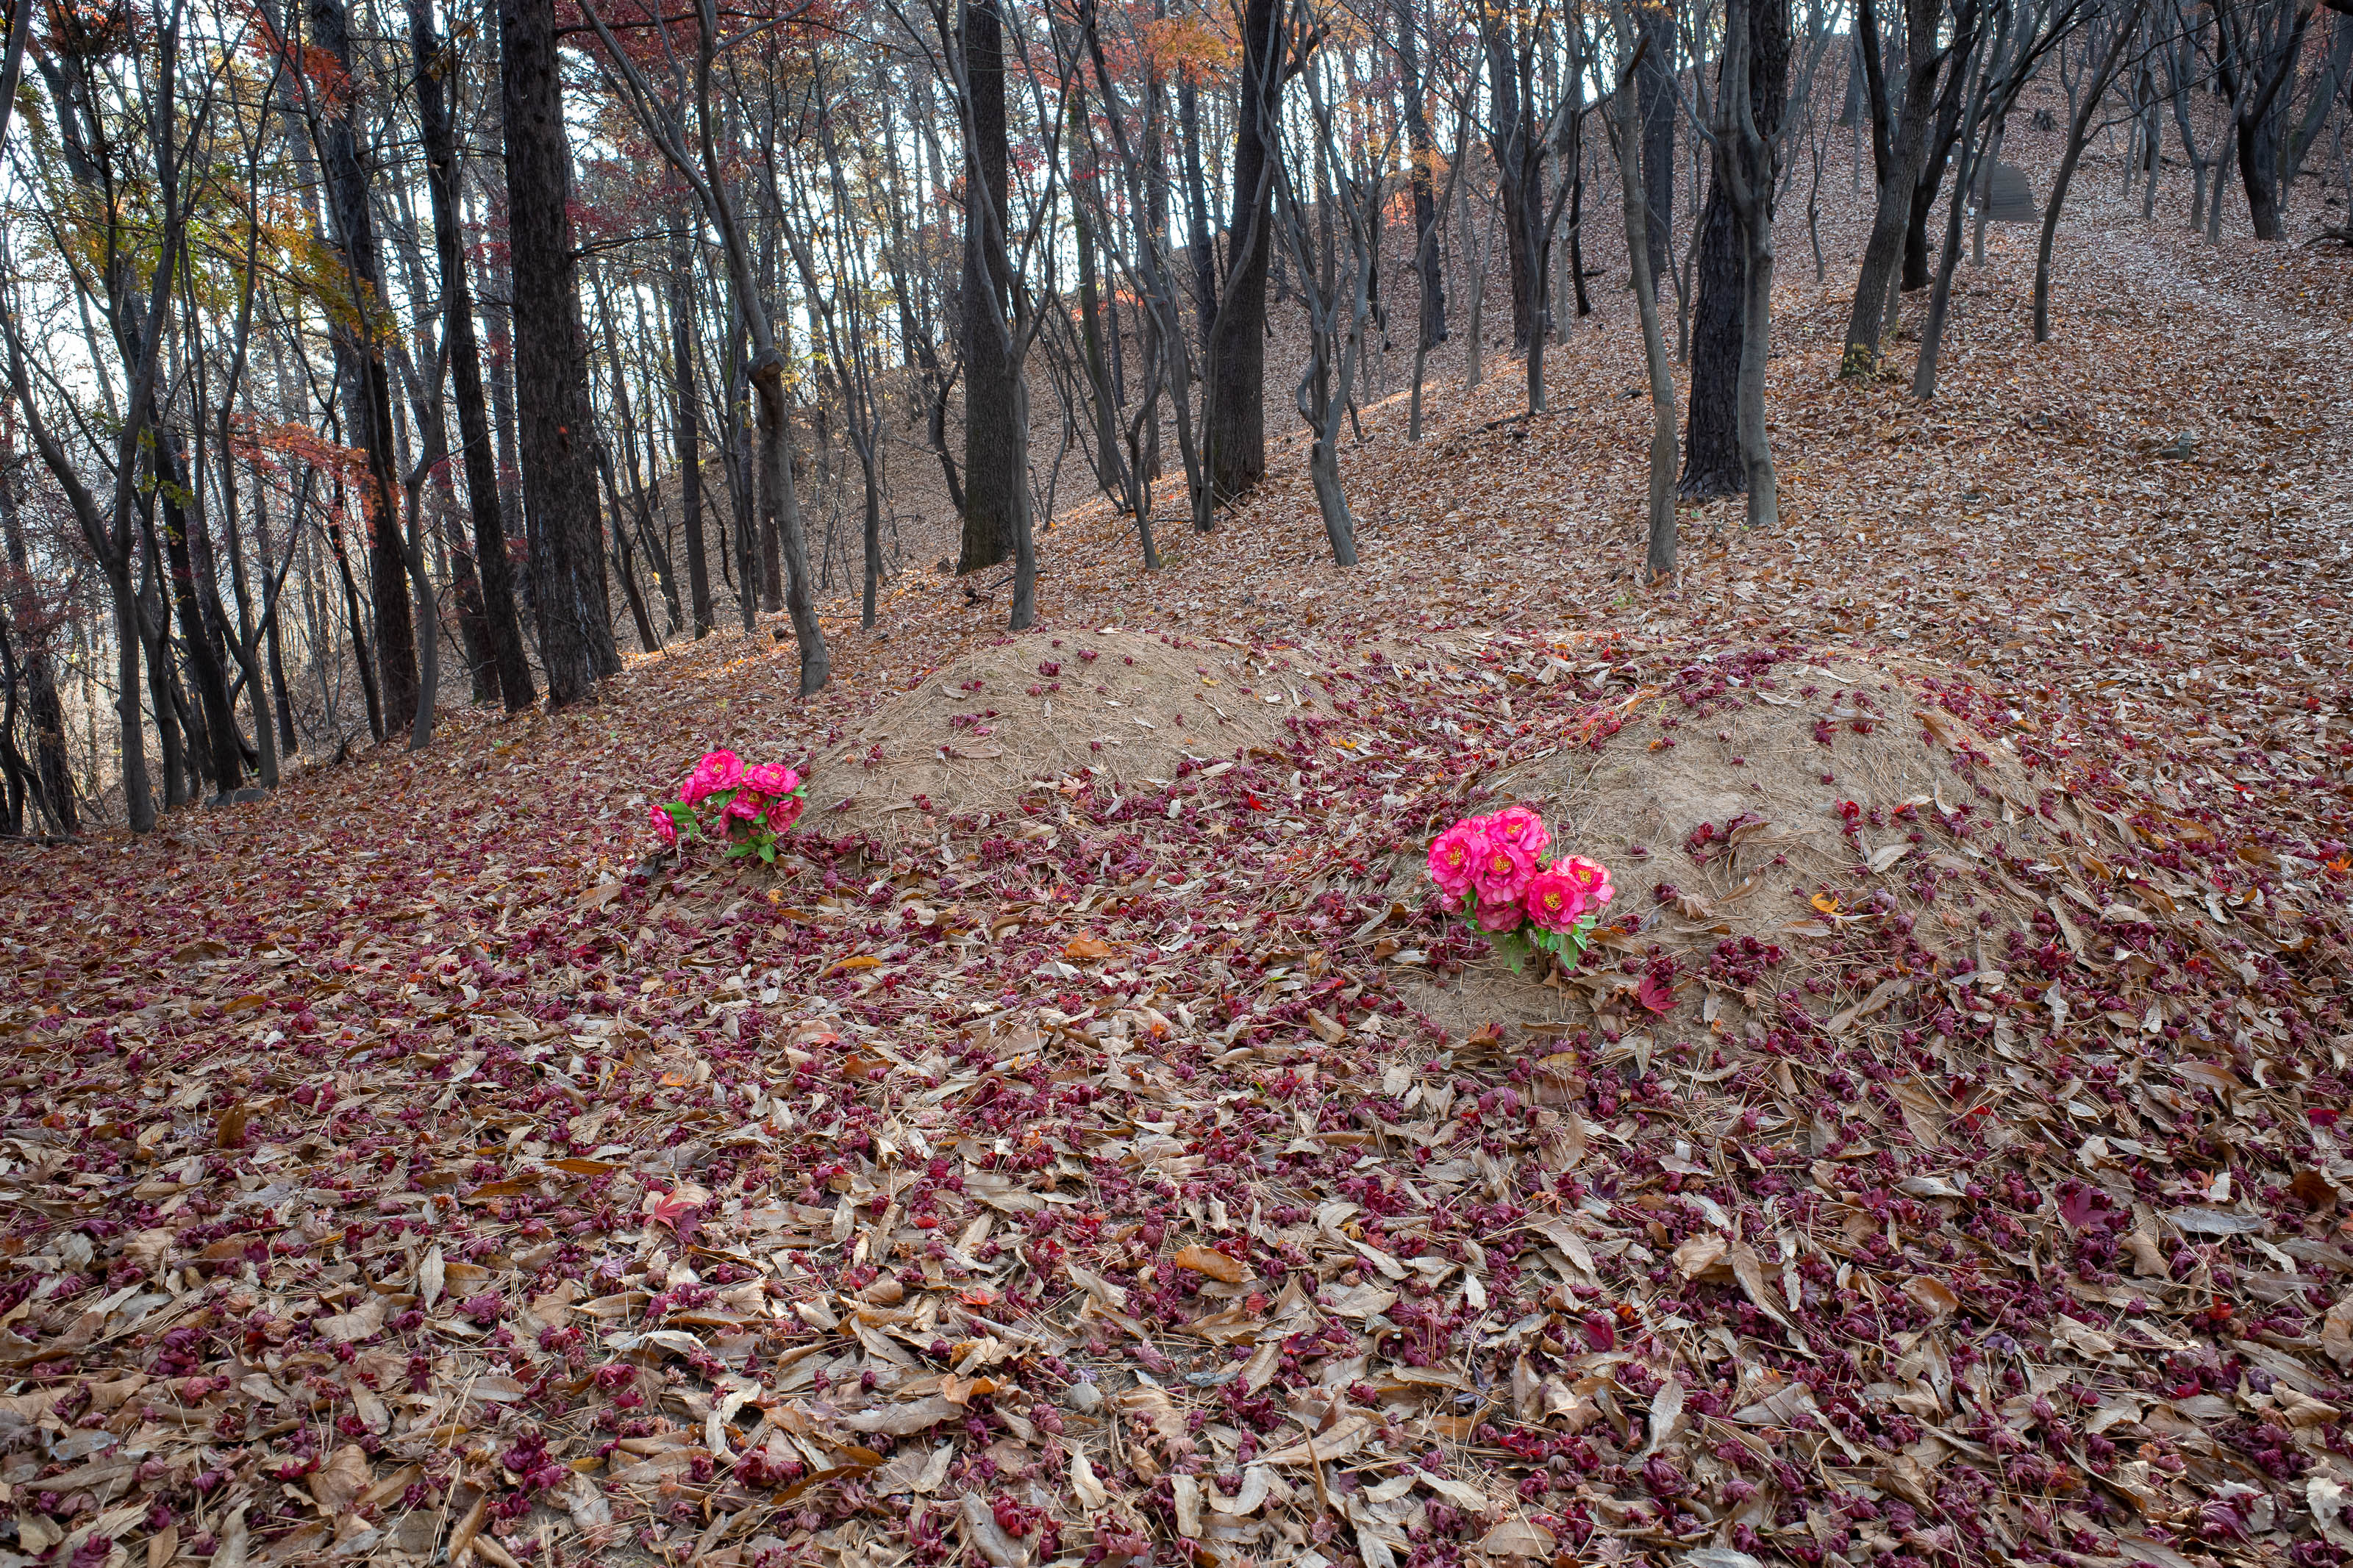 Korean-Hiking-Daejeon-Bomunsan - Hmm, I thought all these graves in the forest were ancient historically significant sites. These 2 look like they were buried yesterday. And in a kind